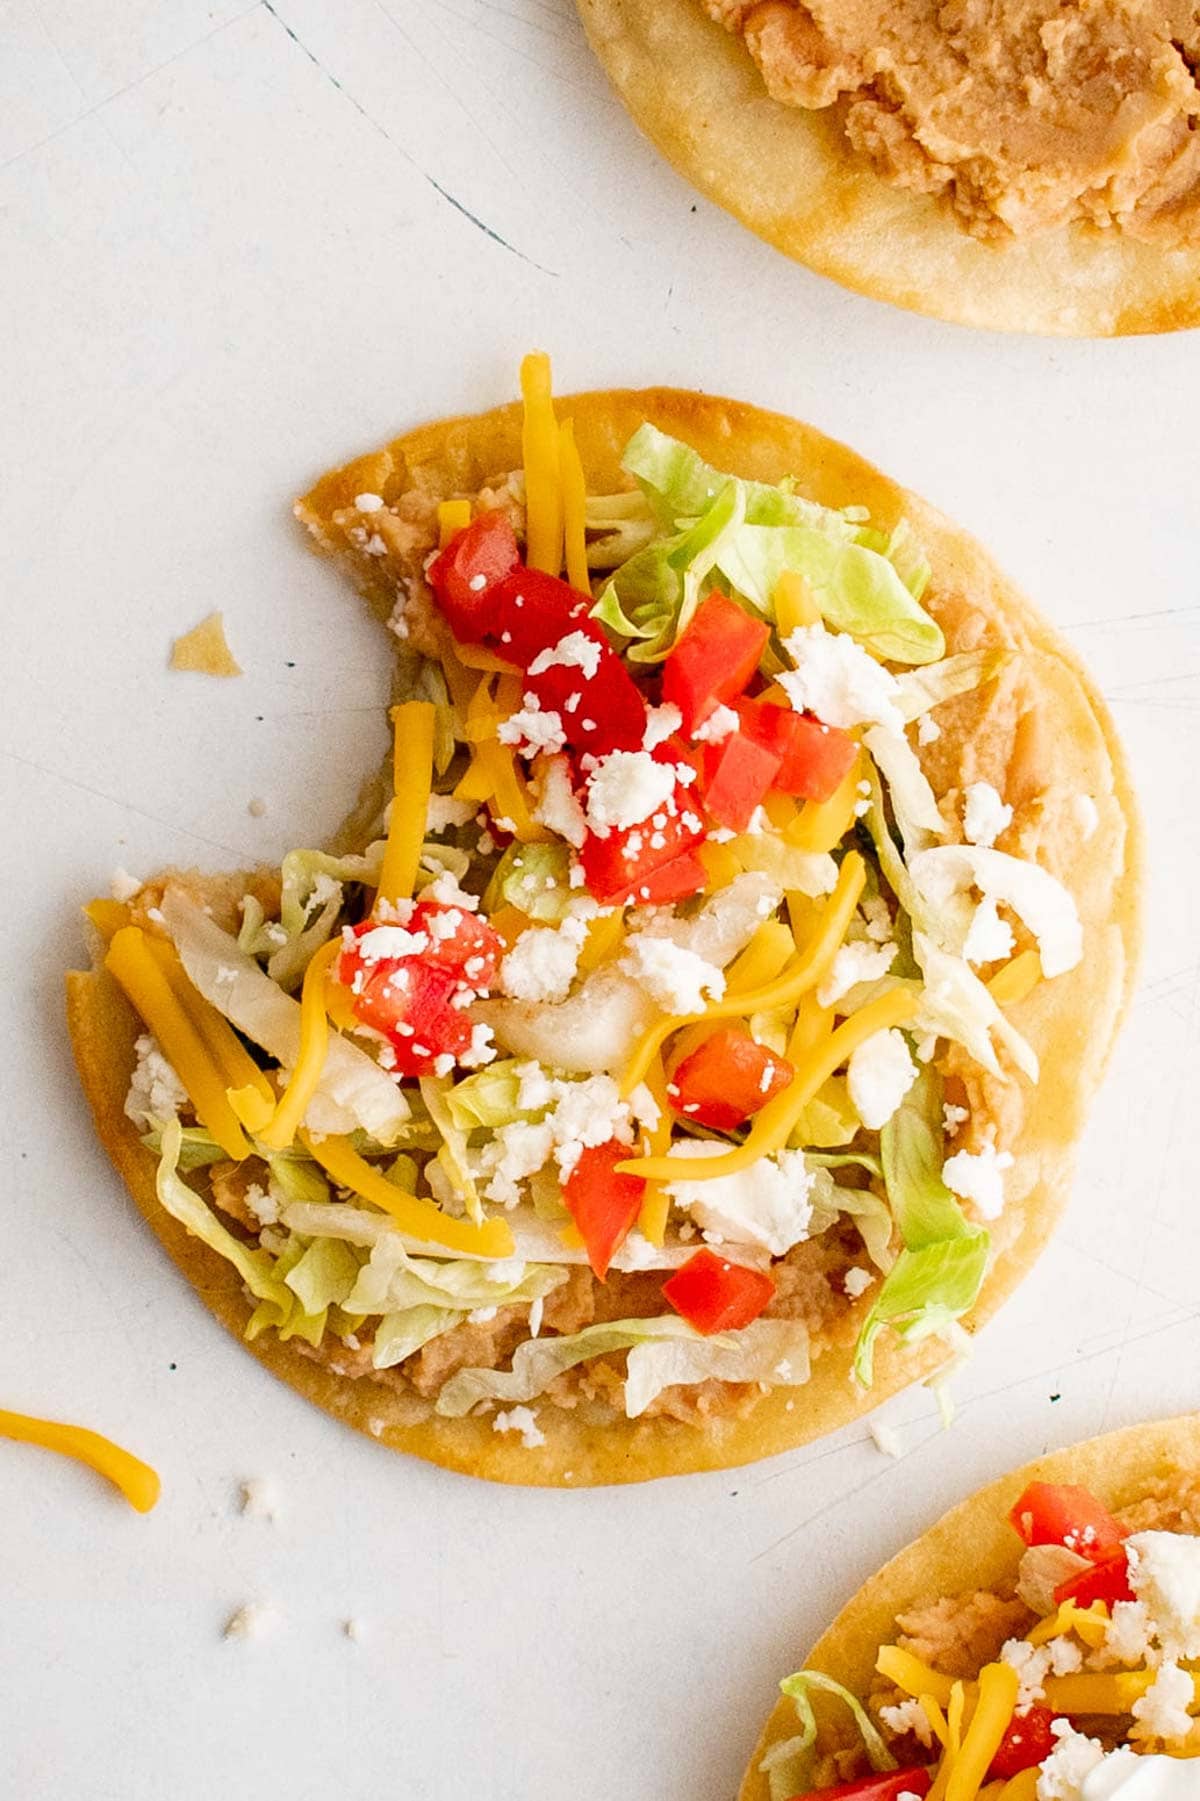 Loaded tostada with a bite taken out of it.